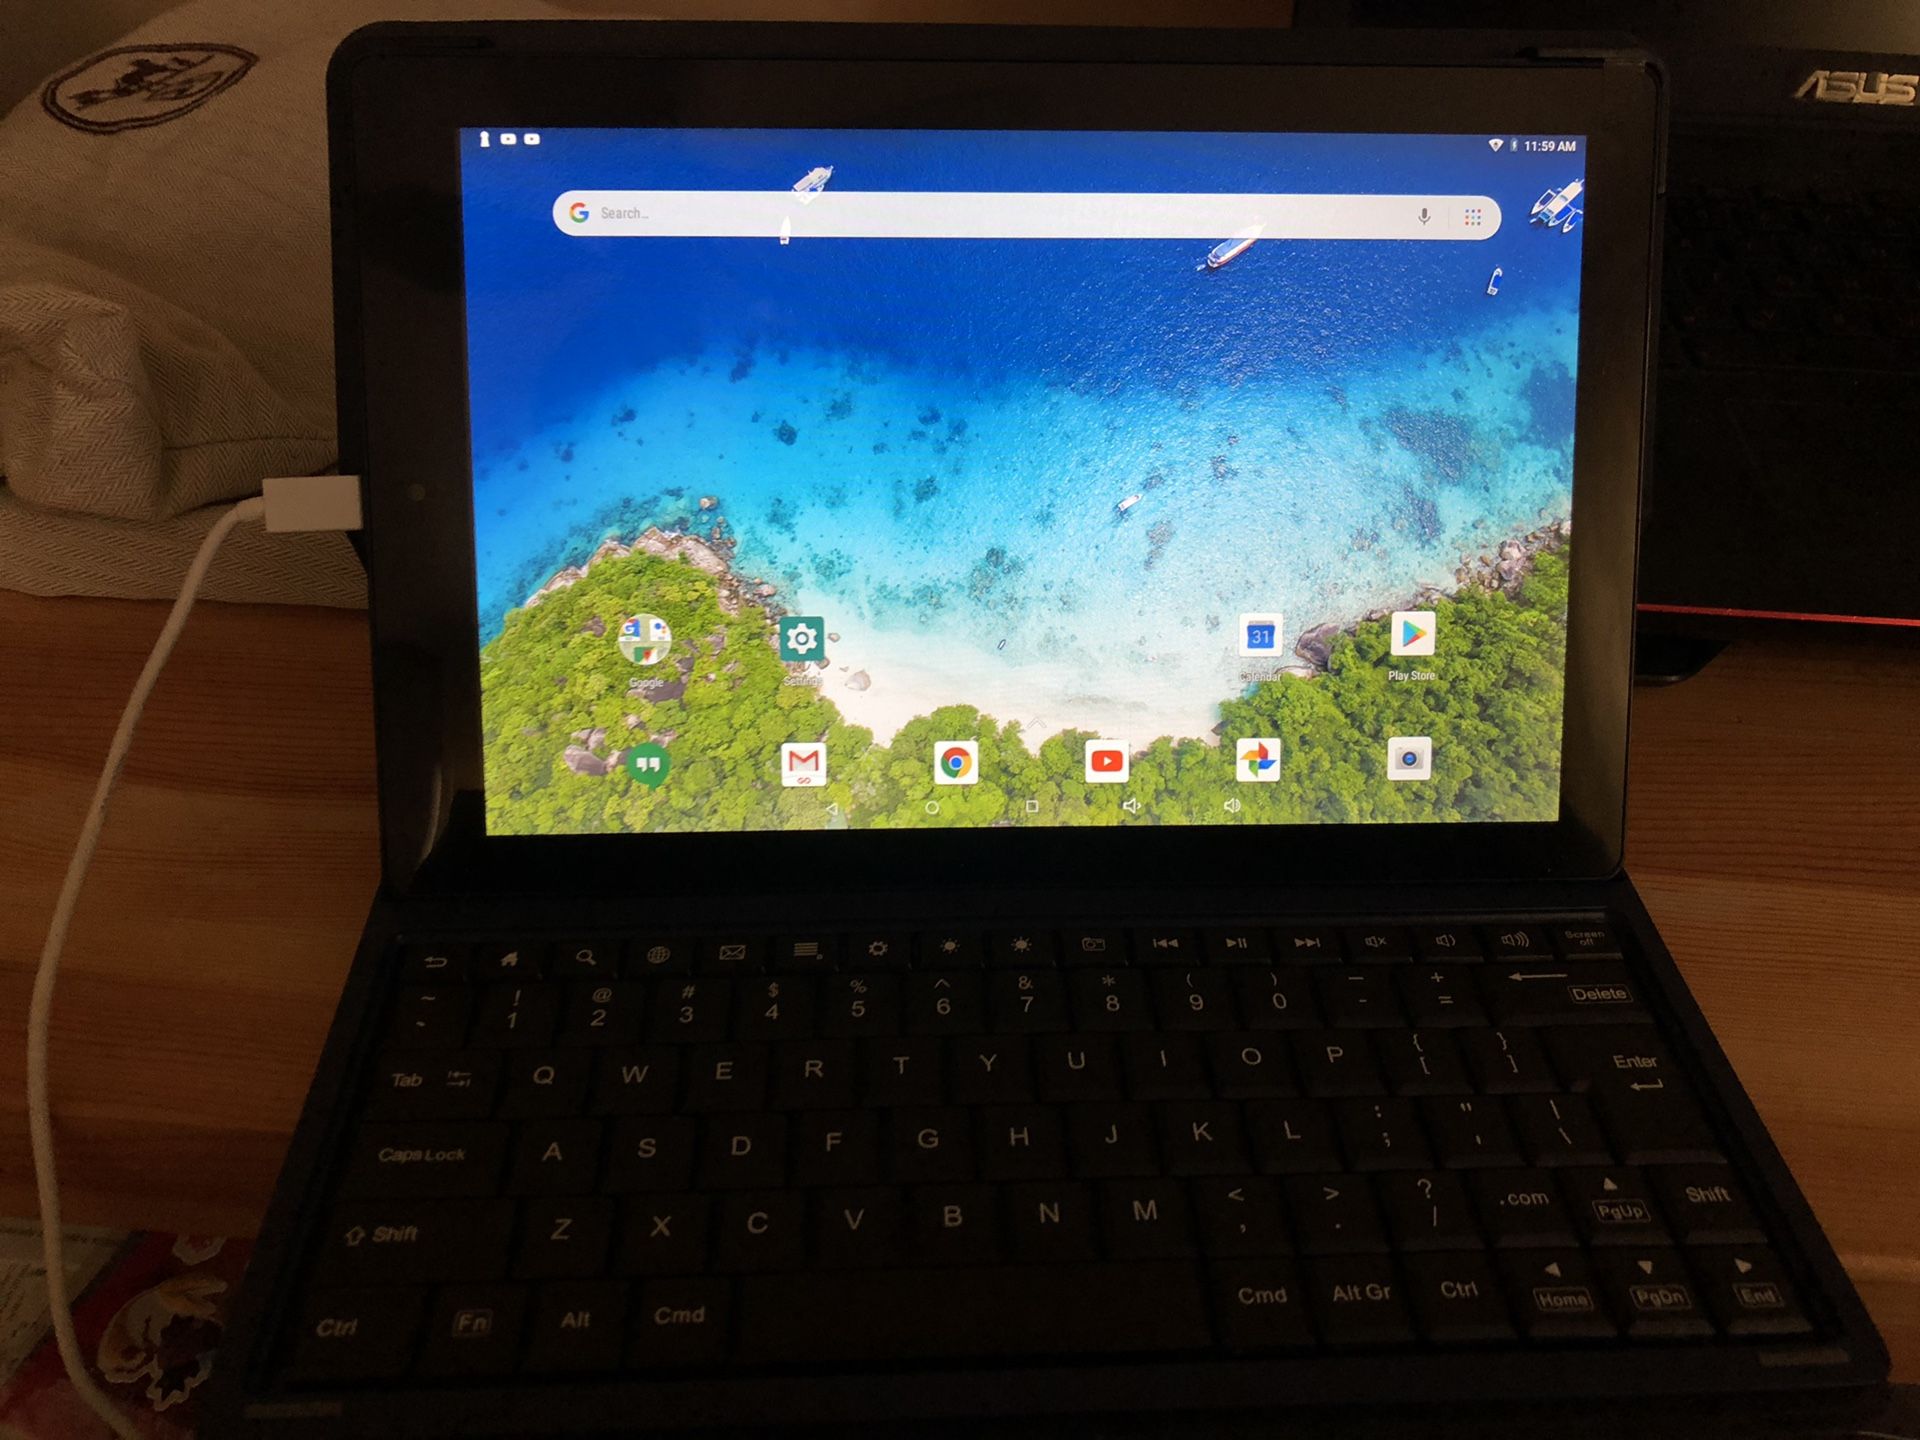 New RCT 10.1" Android 8.1 tablet with Folio keyboards (8.1 Go Edition)